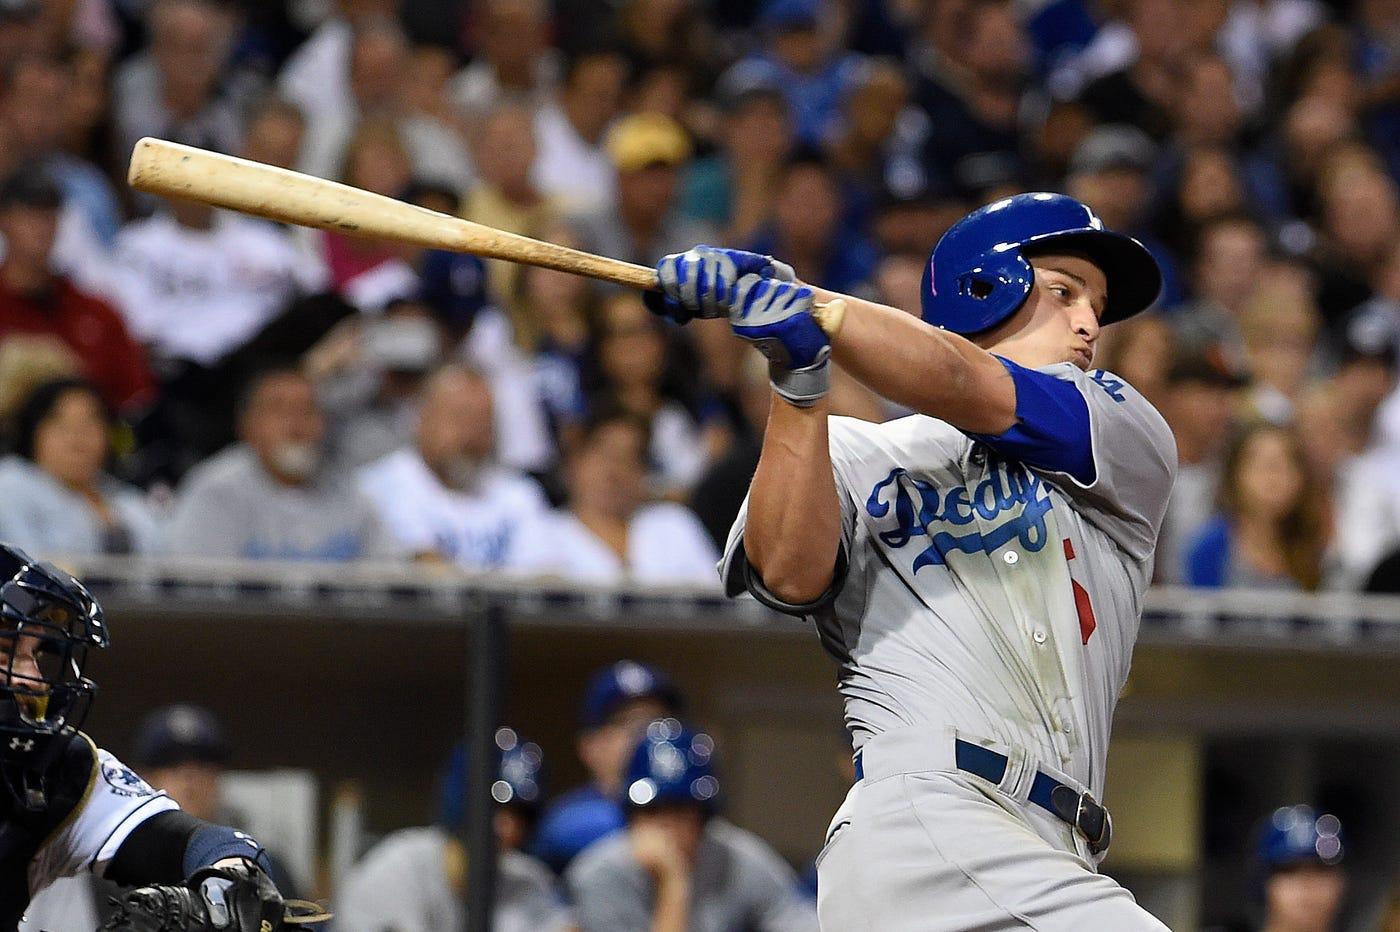 The Dodgers' Corey Seager doesn't act like baseball's top prospect